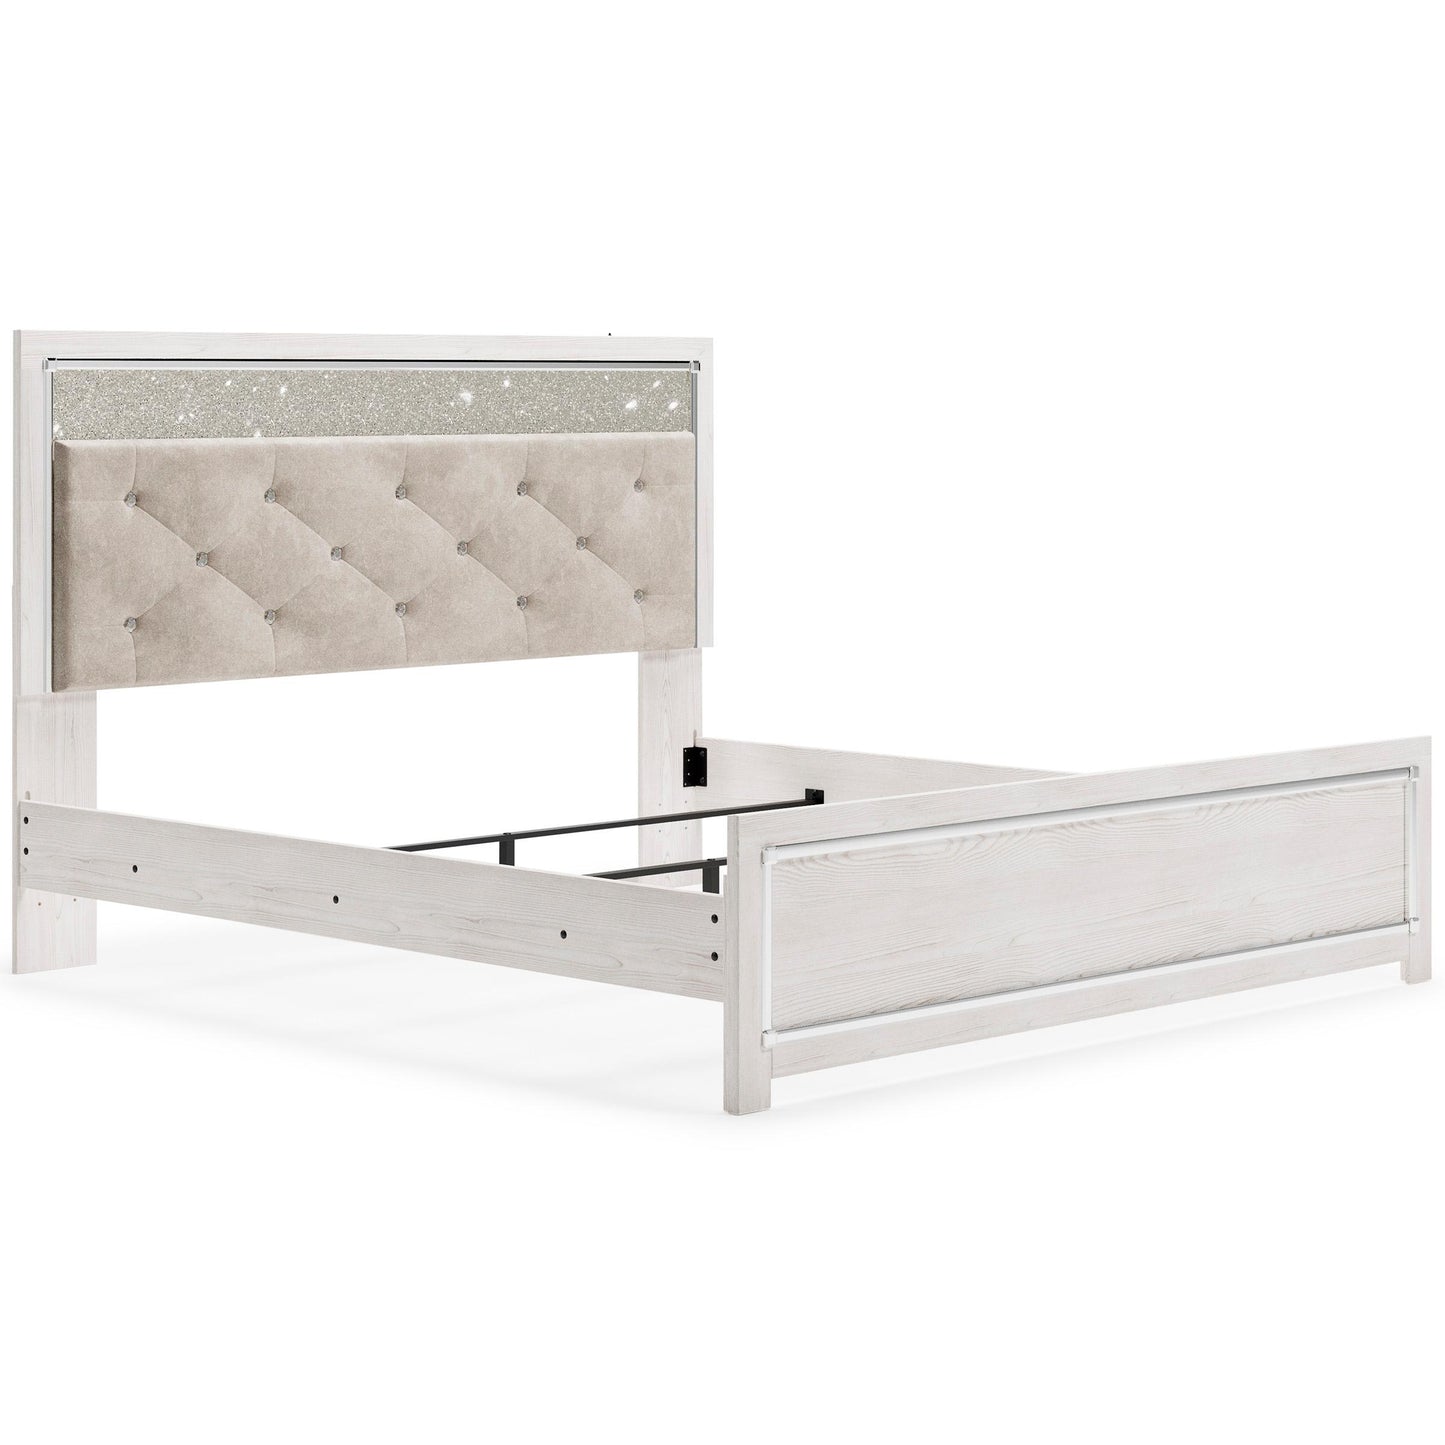 Signature Design by Ashley Altyra King Upholstered Panel Bed B2640-58/B2640-56/B2640-97